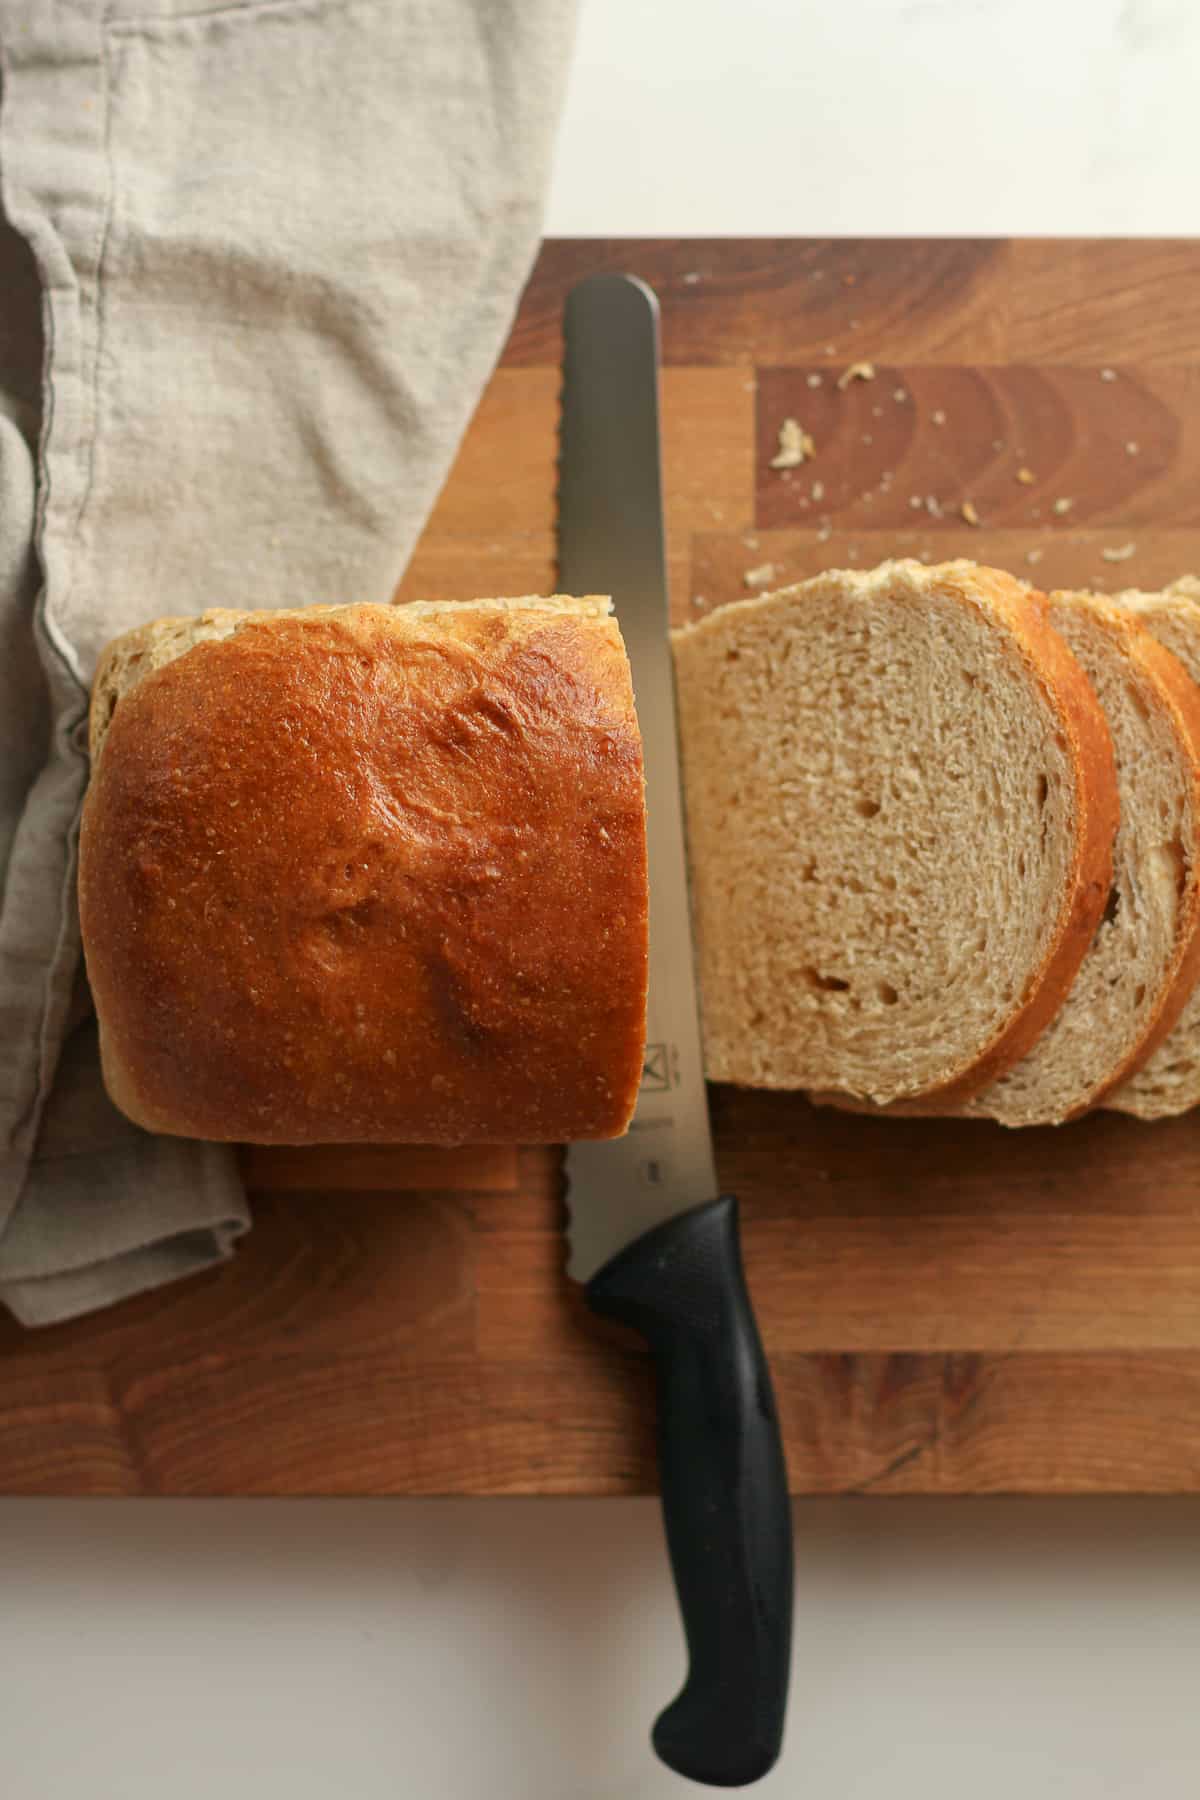 A loaf of bread being sliced.